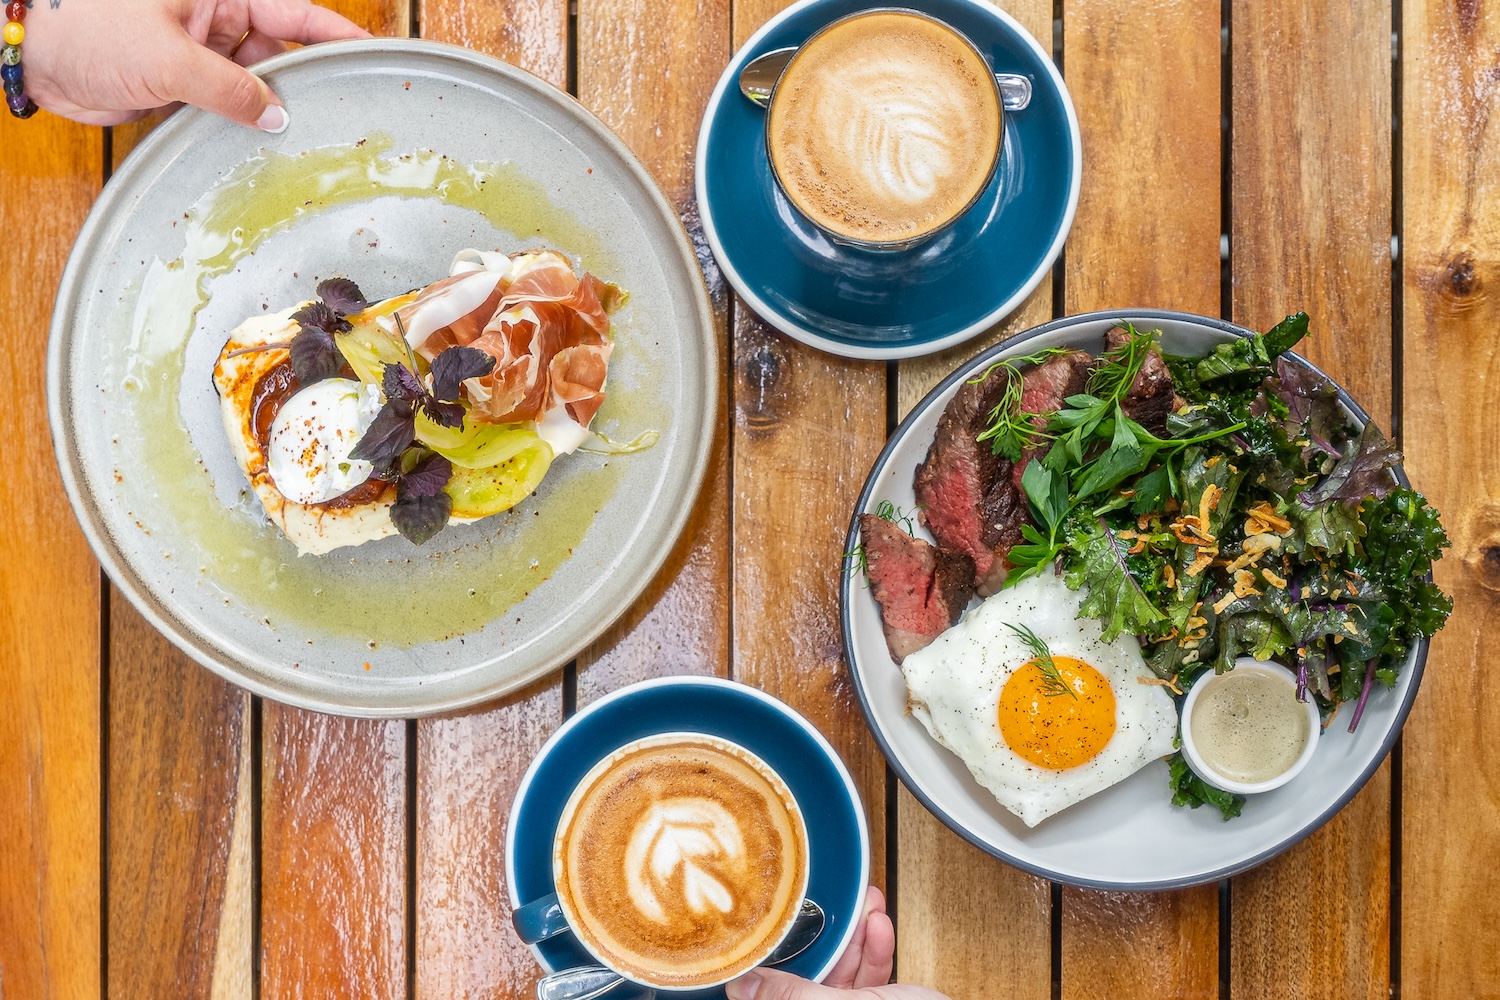 Two Hands' incredible brunch menu makes it's queue well worth the wait